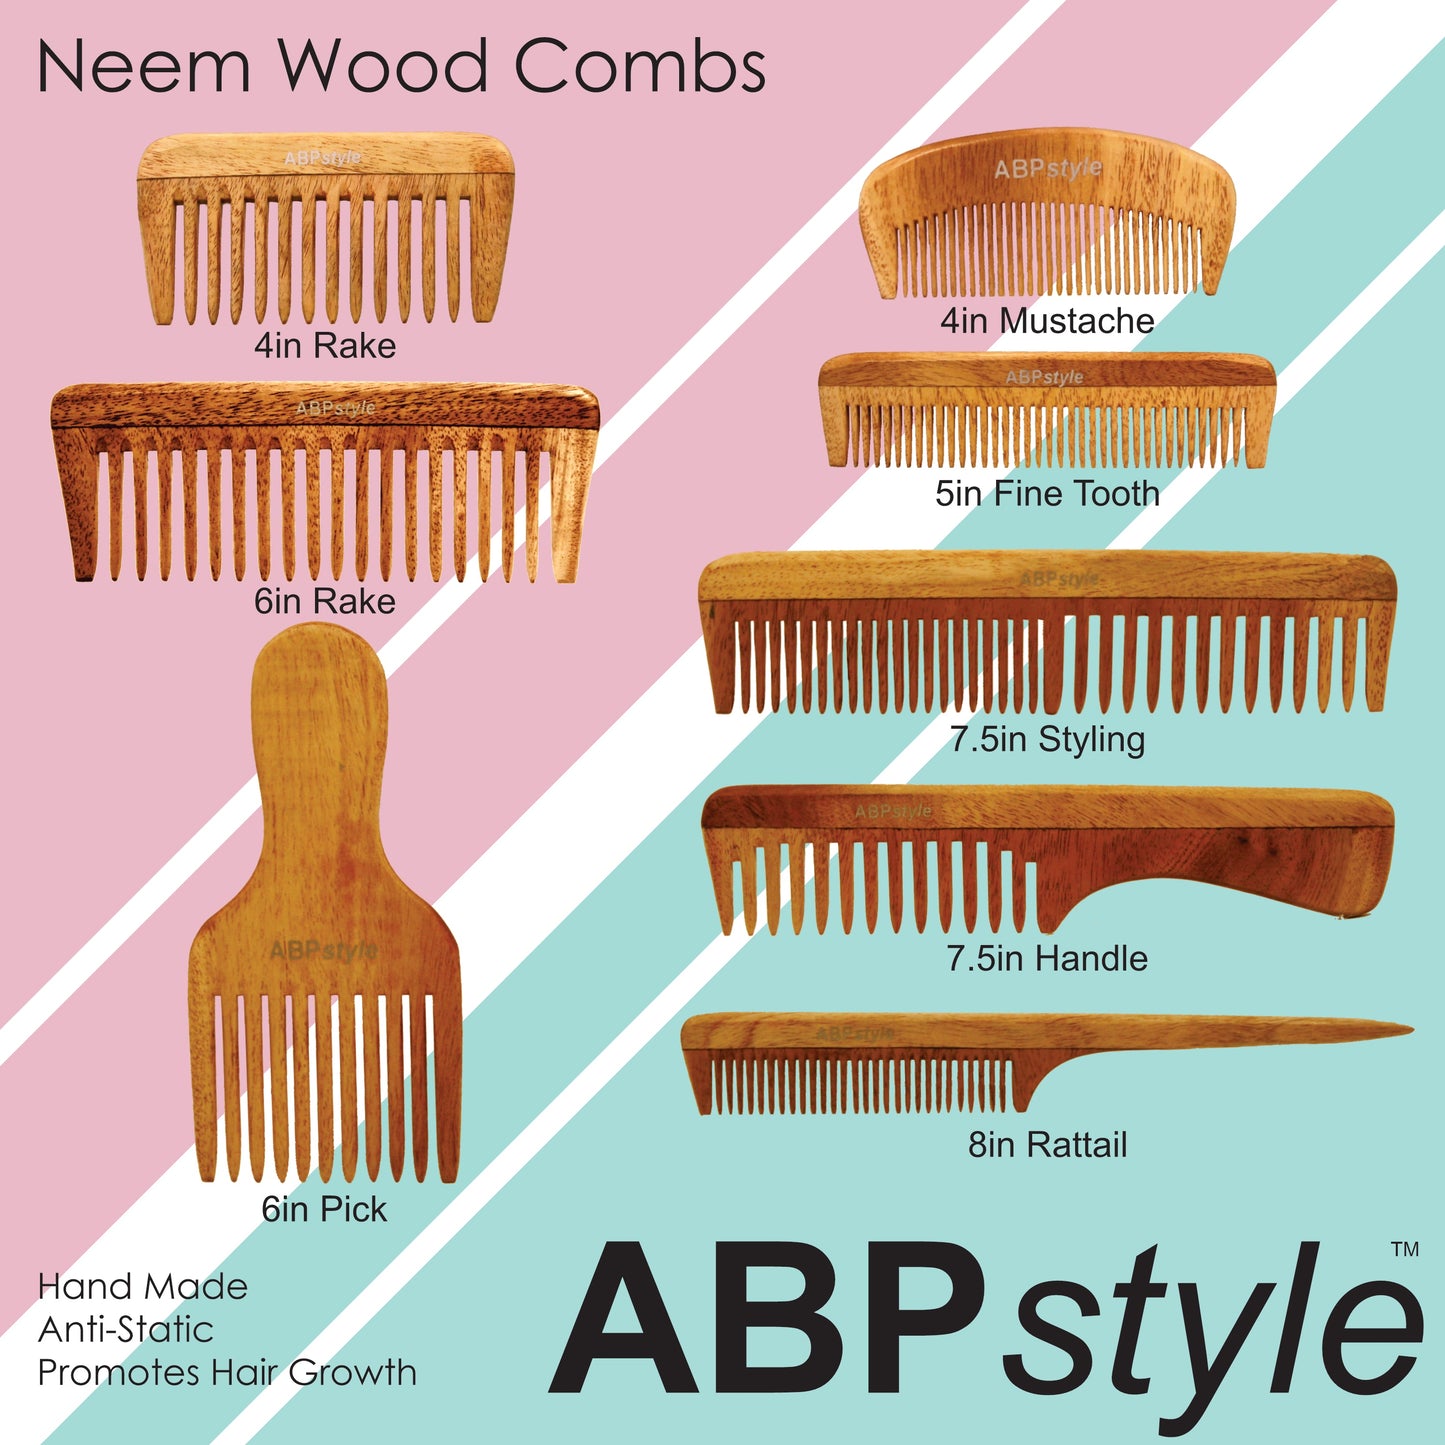 ABPStyle, 7in Neem Wood Handle Comb. Anti-Static, Damage Free, Promotes Hair Growth, Environmentally Friendly